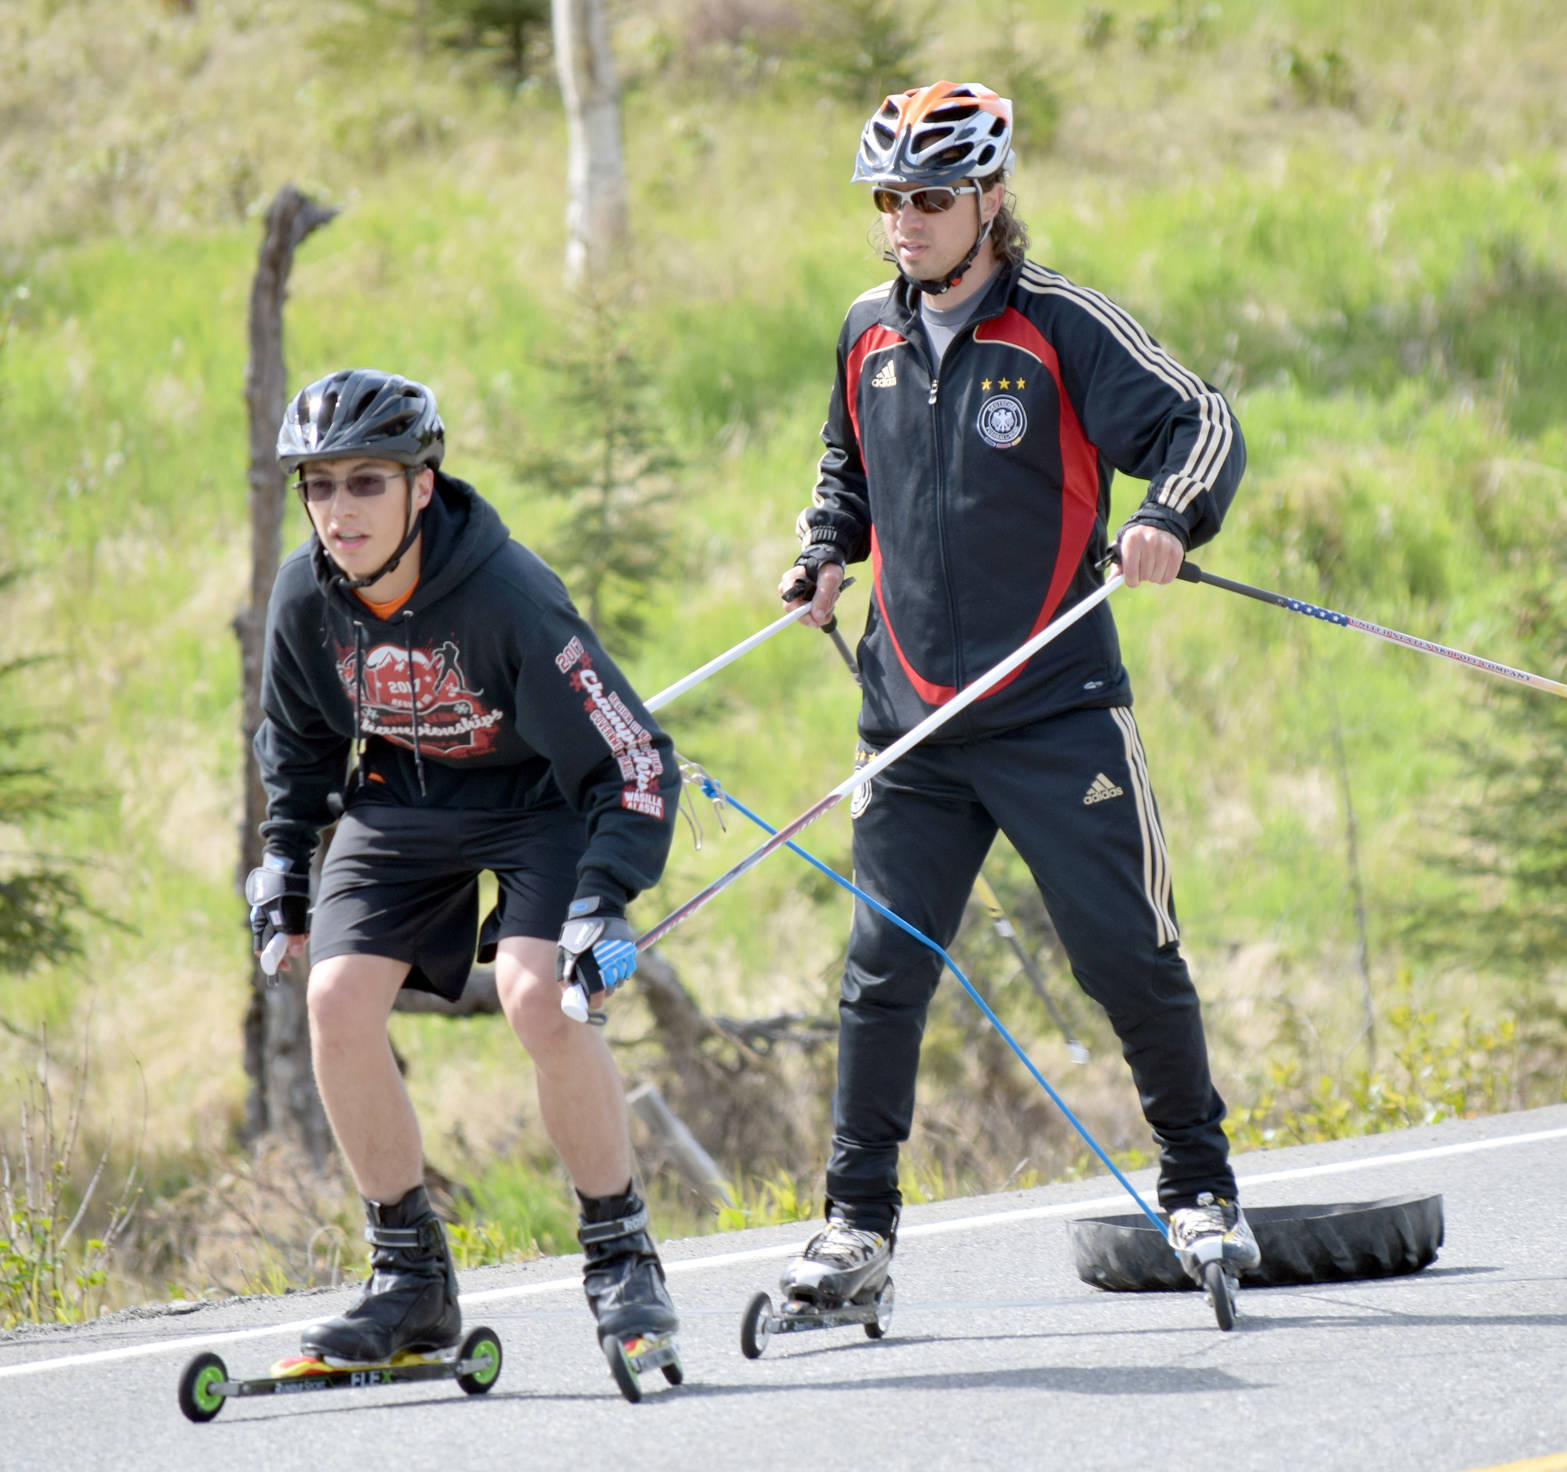 Bradley Walters, a sophomore at Soldotna High School, receives instruction from Andy Liebner on poling technique Monday on South Cohoe Loop. (Photo by Jeff Helminiak/Peninsula Clarion)